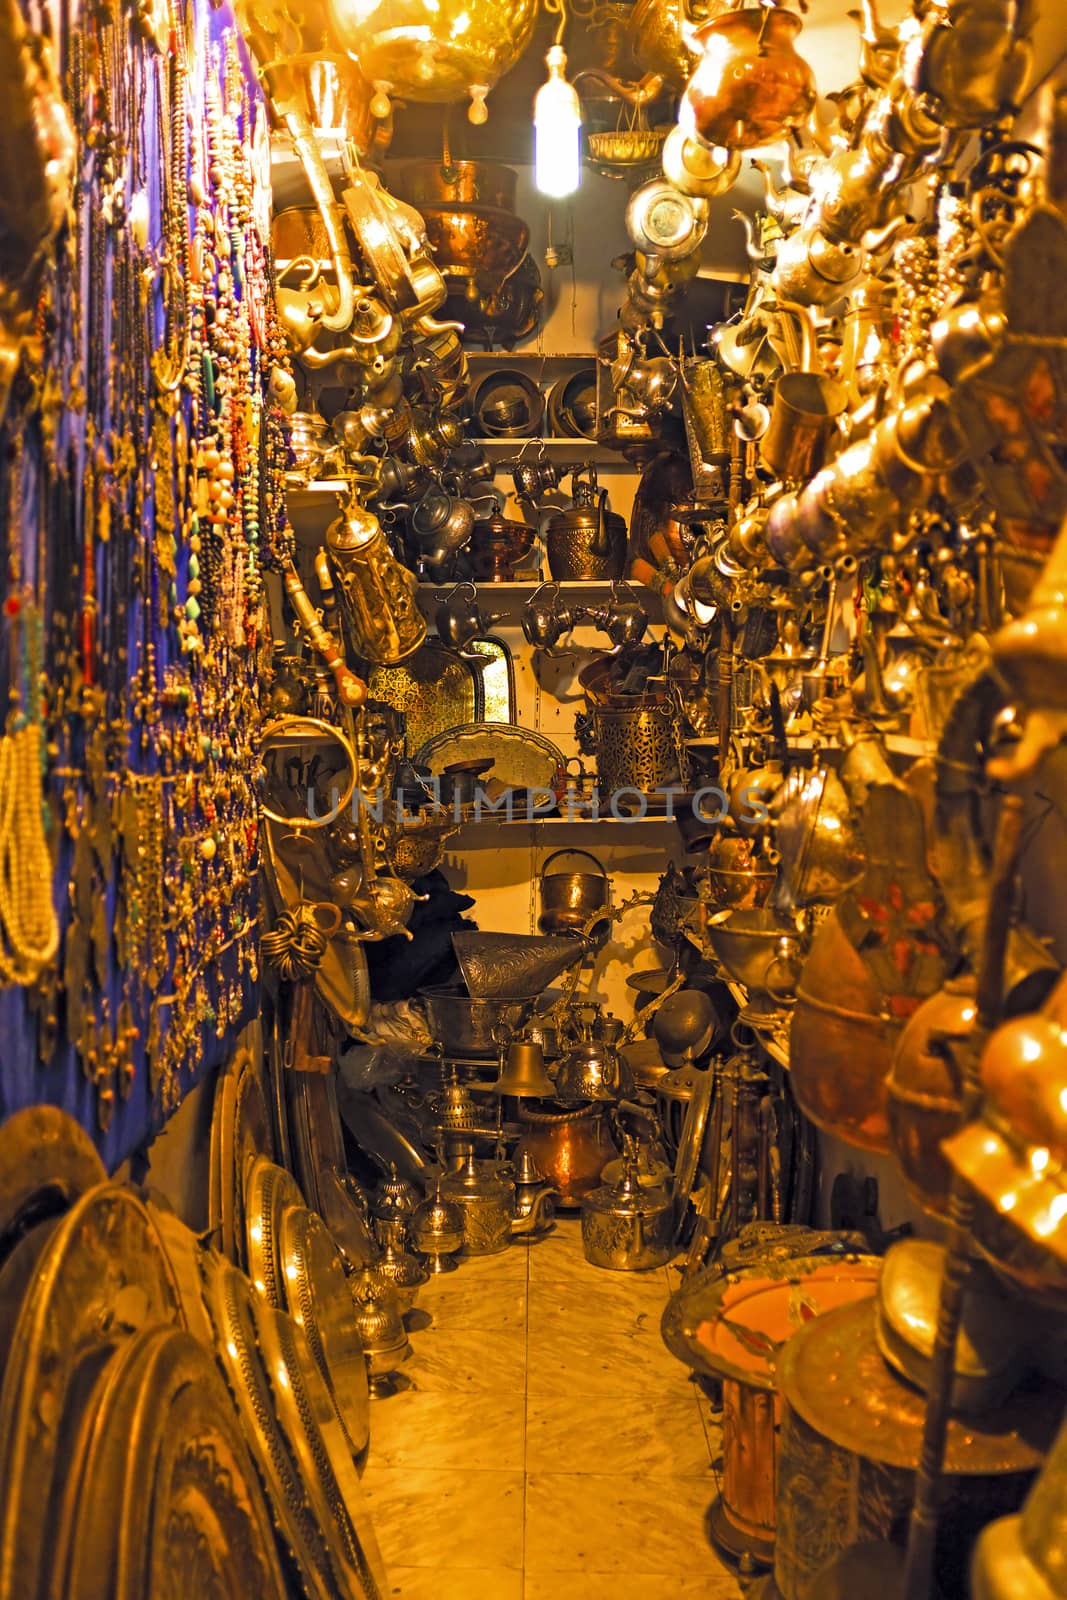 Moroccan shop with copper pots and goods by devy